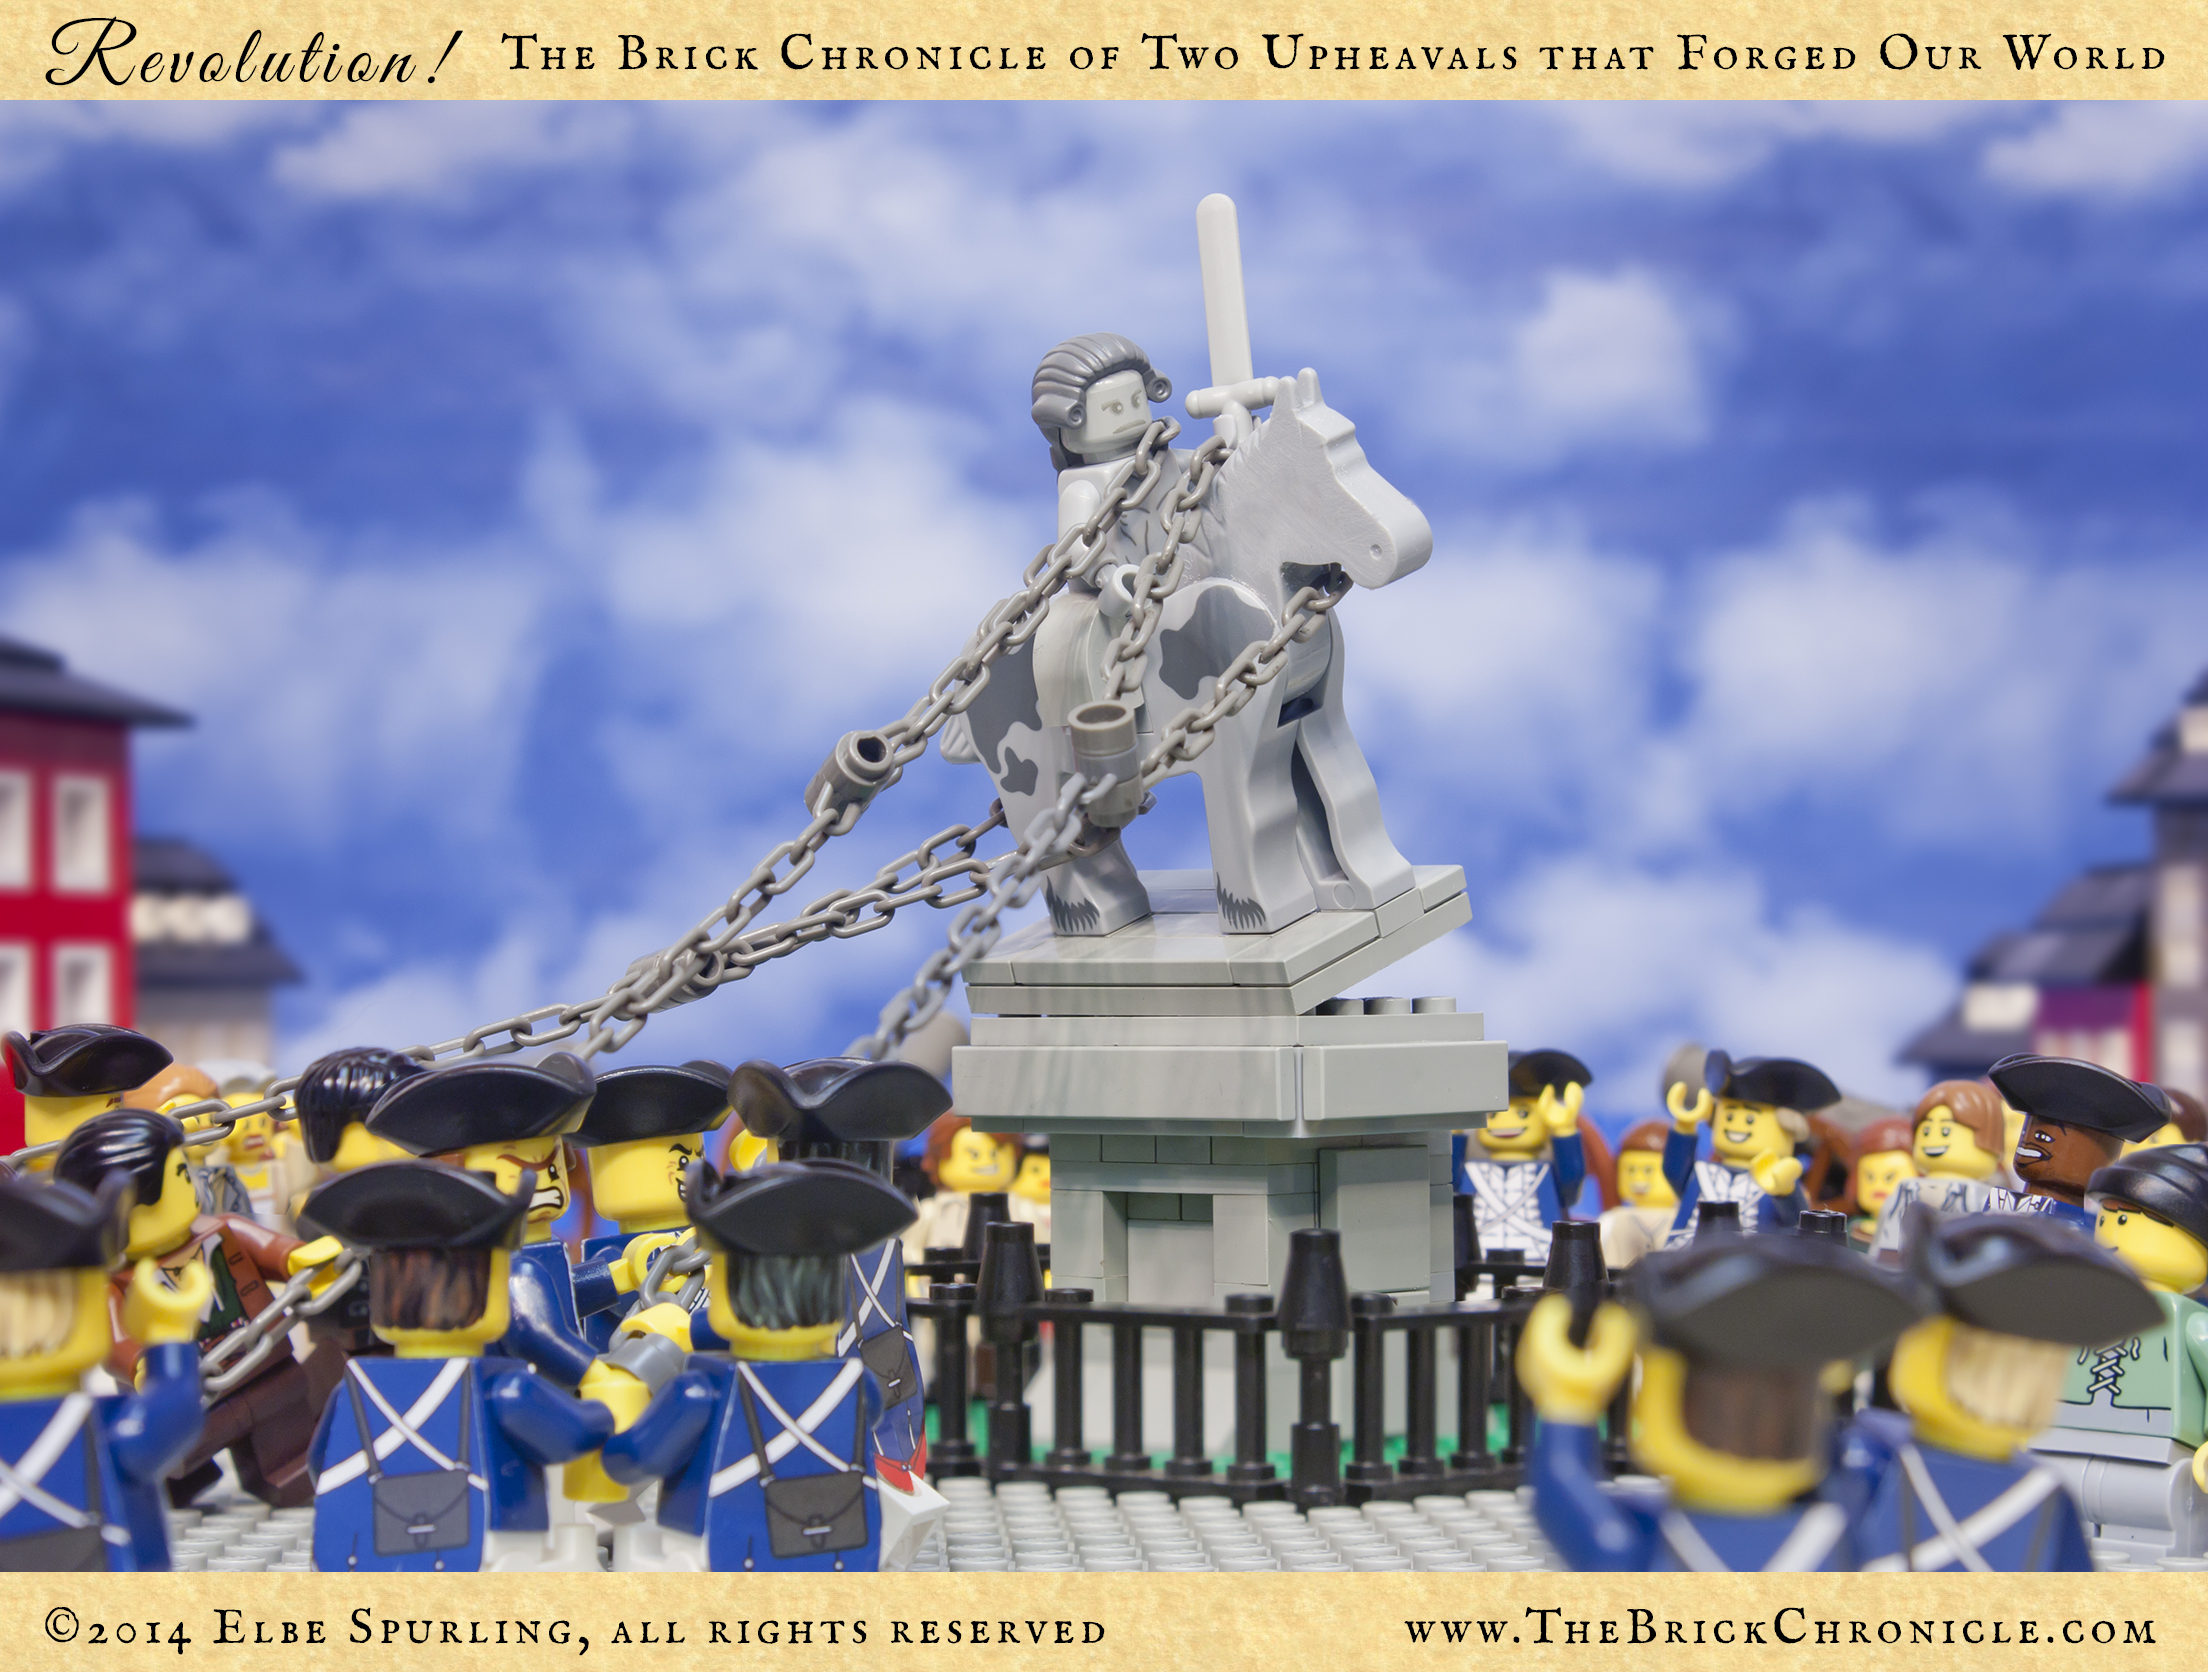 On July 9, in New York, George Washington marched several brigades to the Commons to hear the Declaration read aloud. The crowds shouted and cheered their approval, and it so stirred anti-British zeal that a mob of soldiers and citizens rushed down to the tip of Manhattan where they used ropes and bars to pull down the equestrian statue of King George III. They then decapitated the statue, hacked off its nose, and mounted the head on a spike outside a tavern. The rest of the statue was melted down to make bullets.